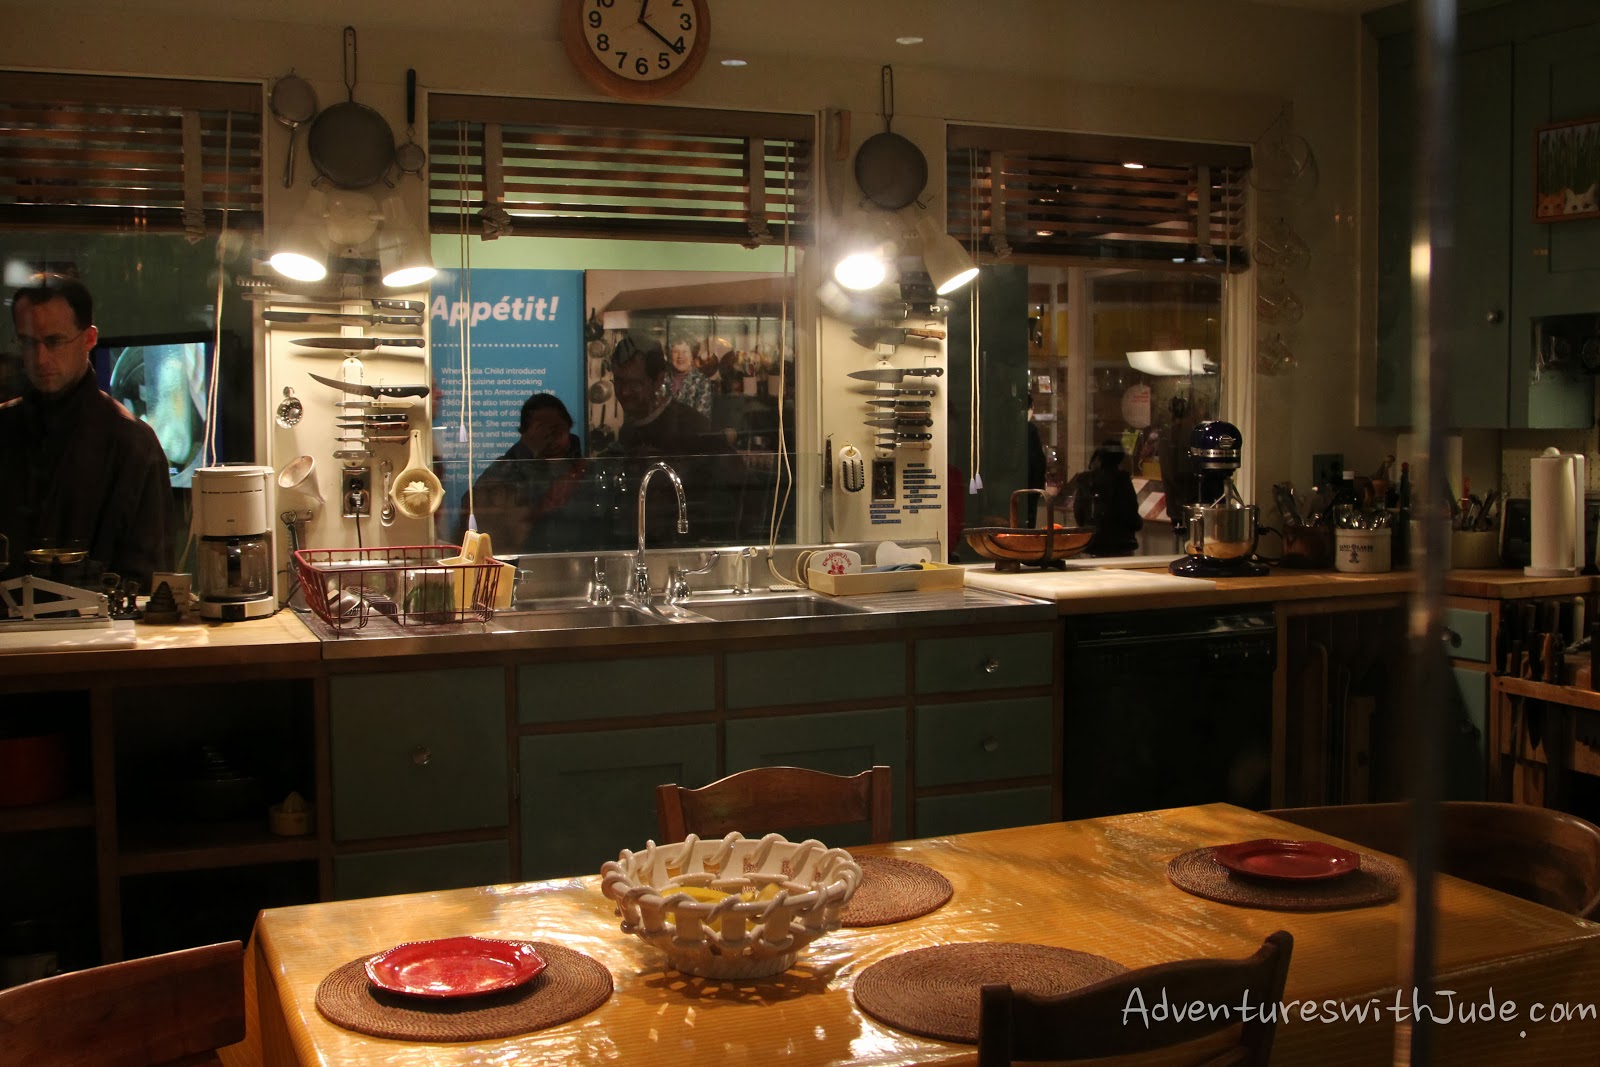 Julia Child's Kitchen recreated at the Smithsonian/American History